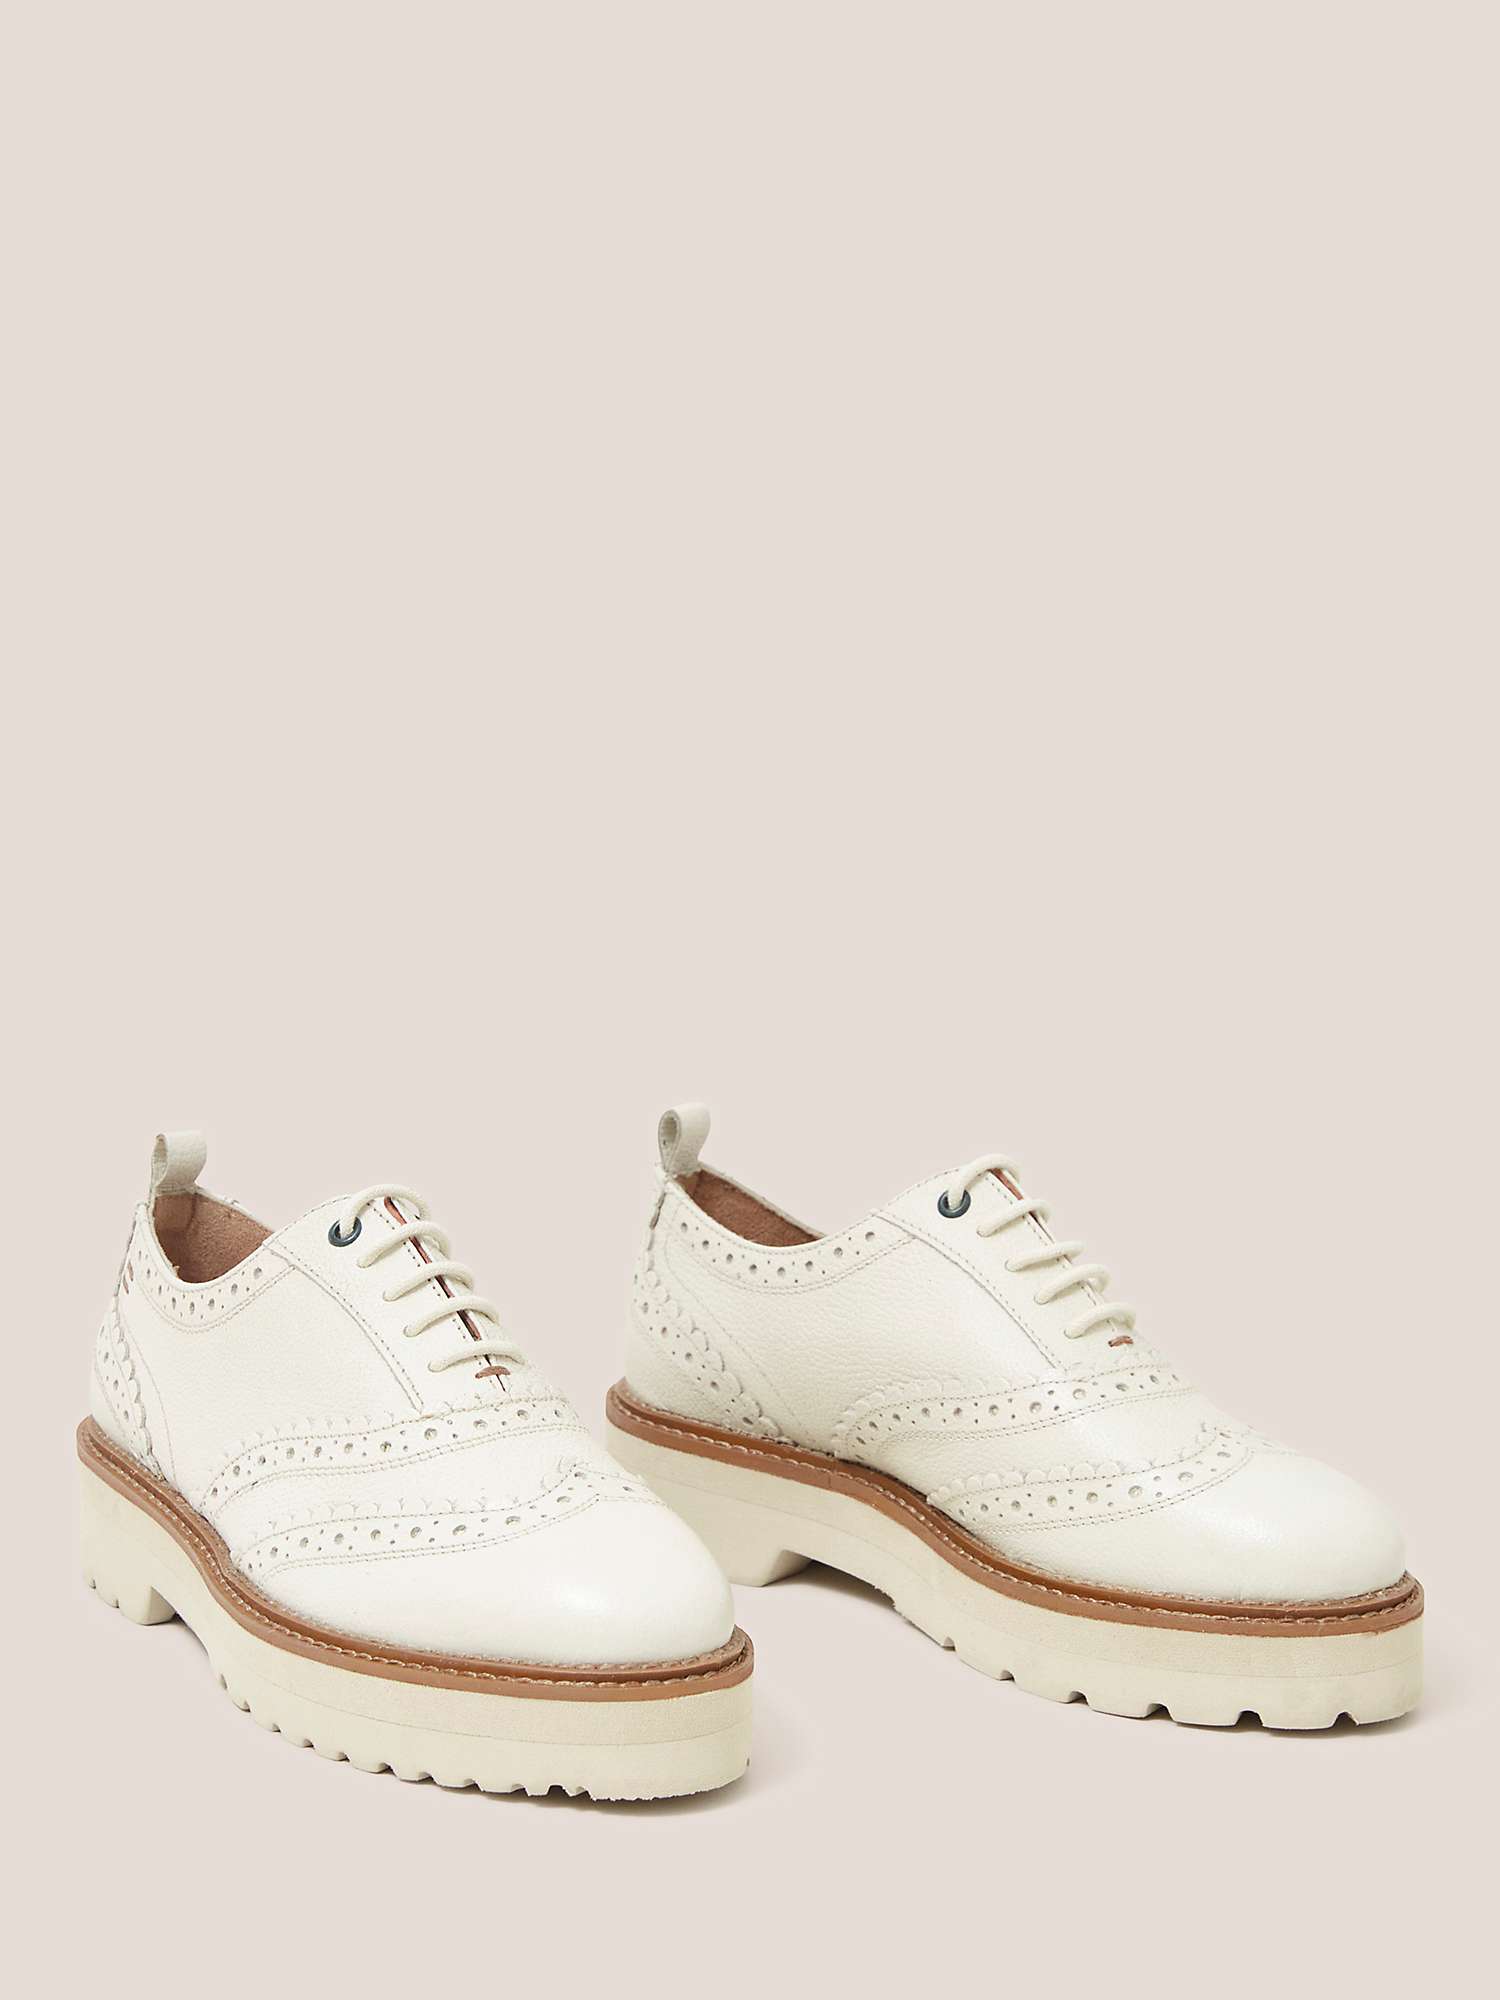 Buy White Stuff Leather Lace Up Brogue Shoes Online at johnlewis.com